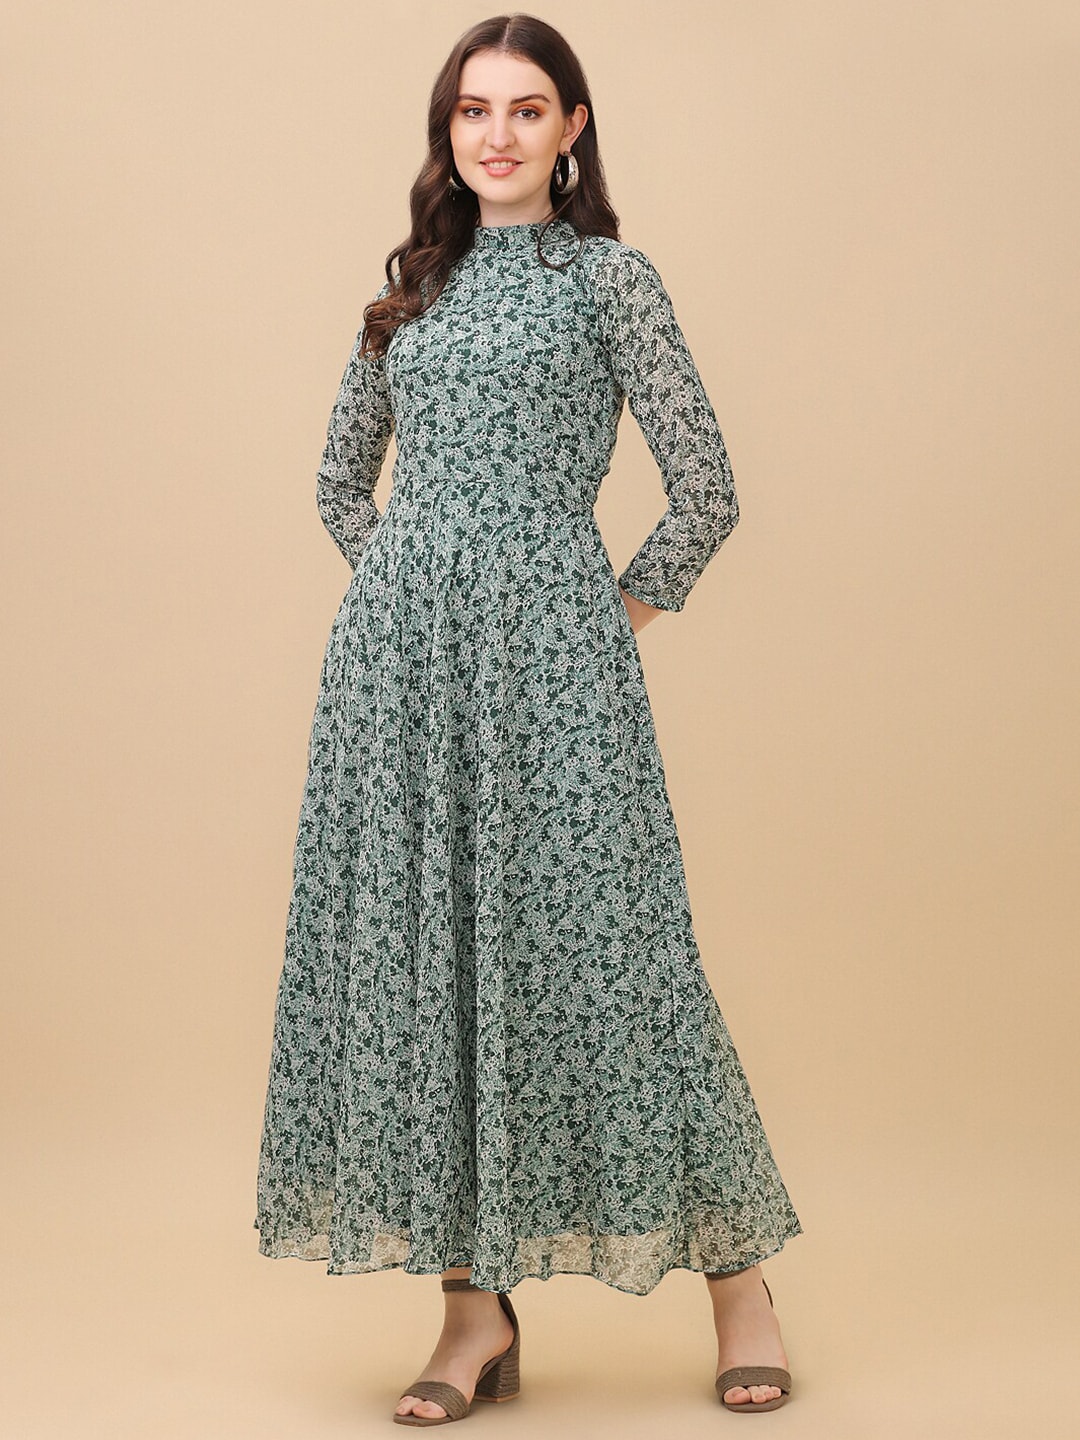 Vidraa Western Store Green Floral Georgette Maxi Dress Price in India